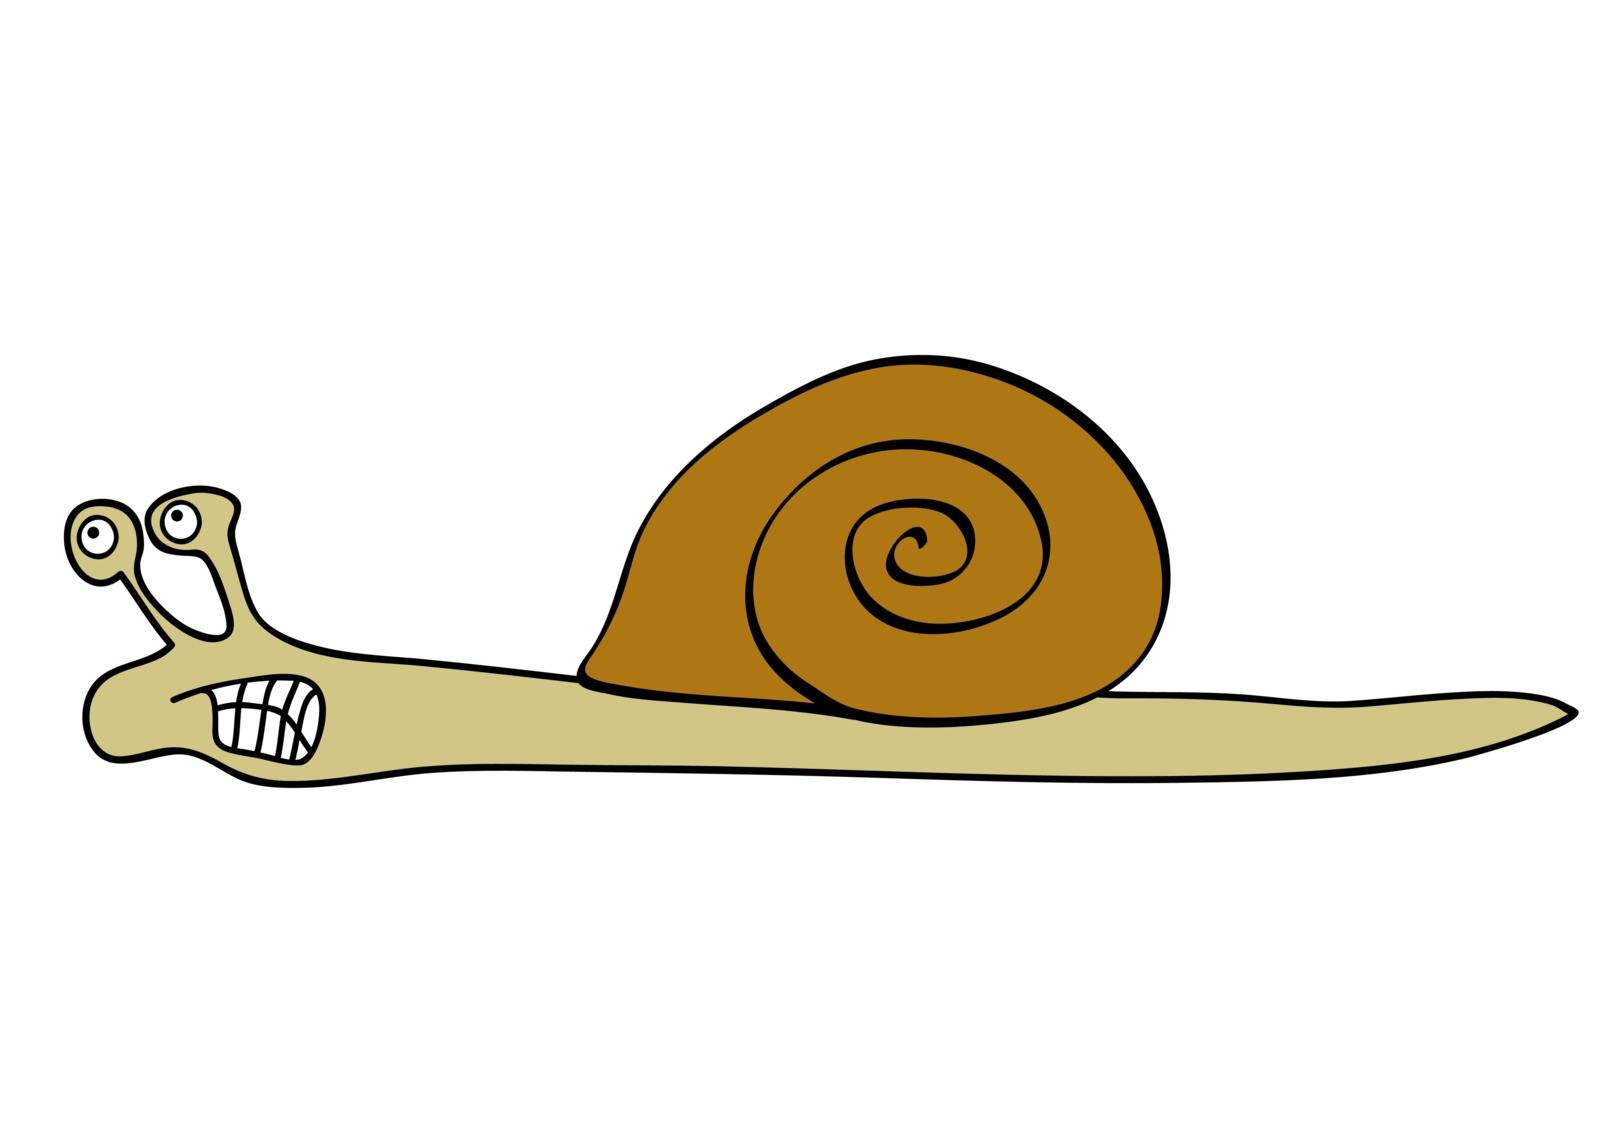 snail by Mibuch